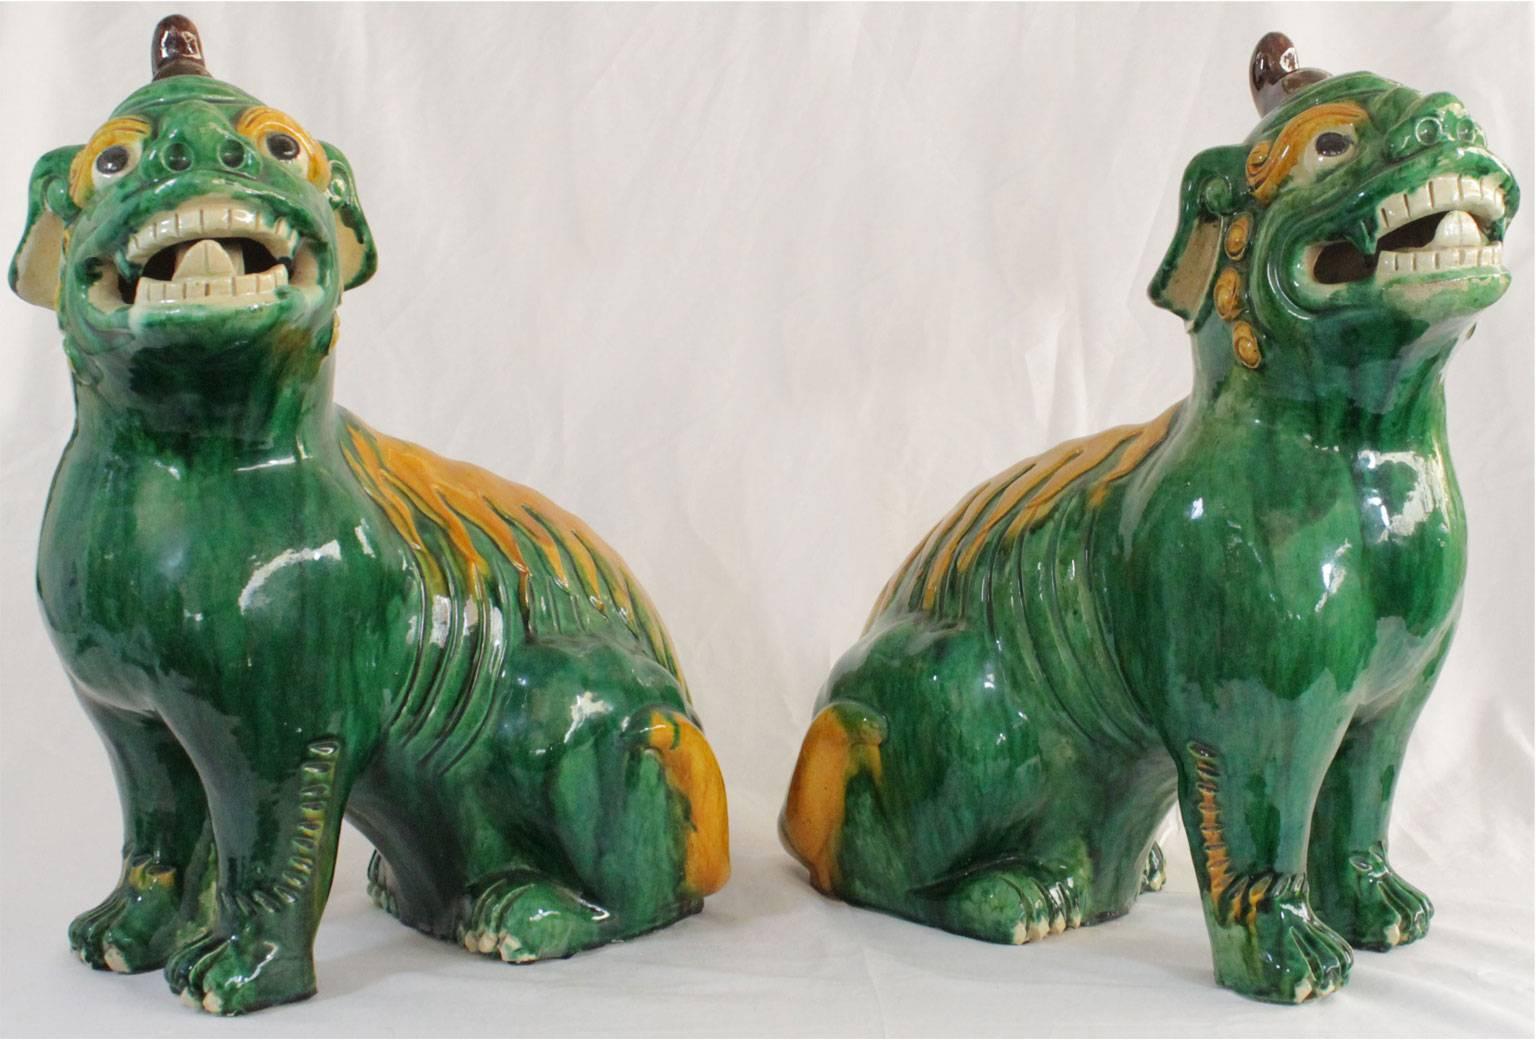 Pair of Qing dynasty foo dogs, of glazed pottery, in the Famille Verte et Jaune palette, each a freestanding, wild looking mythical dog, with open mouth, teeth, extended tongue, bulging eyes and a horn.

Stock ID: D8755.